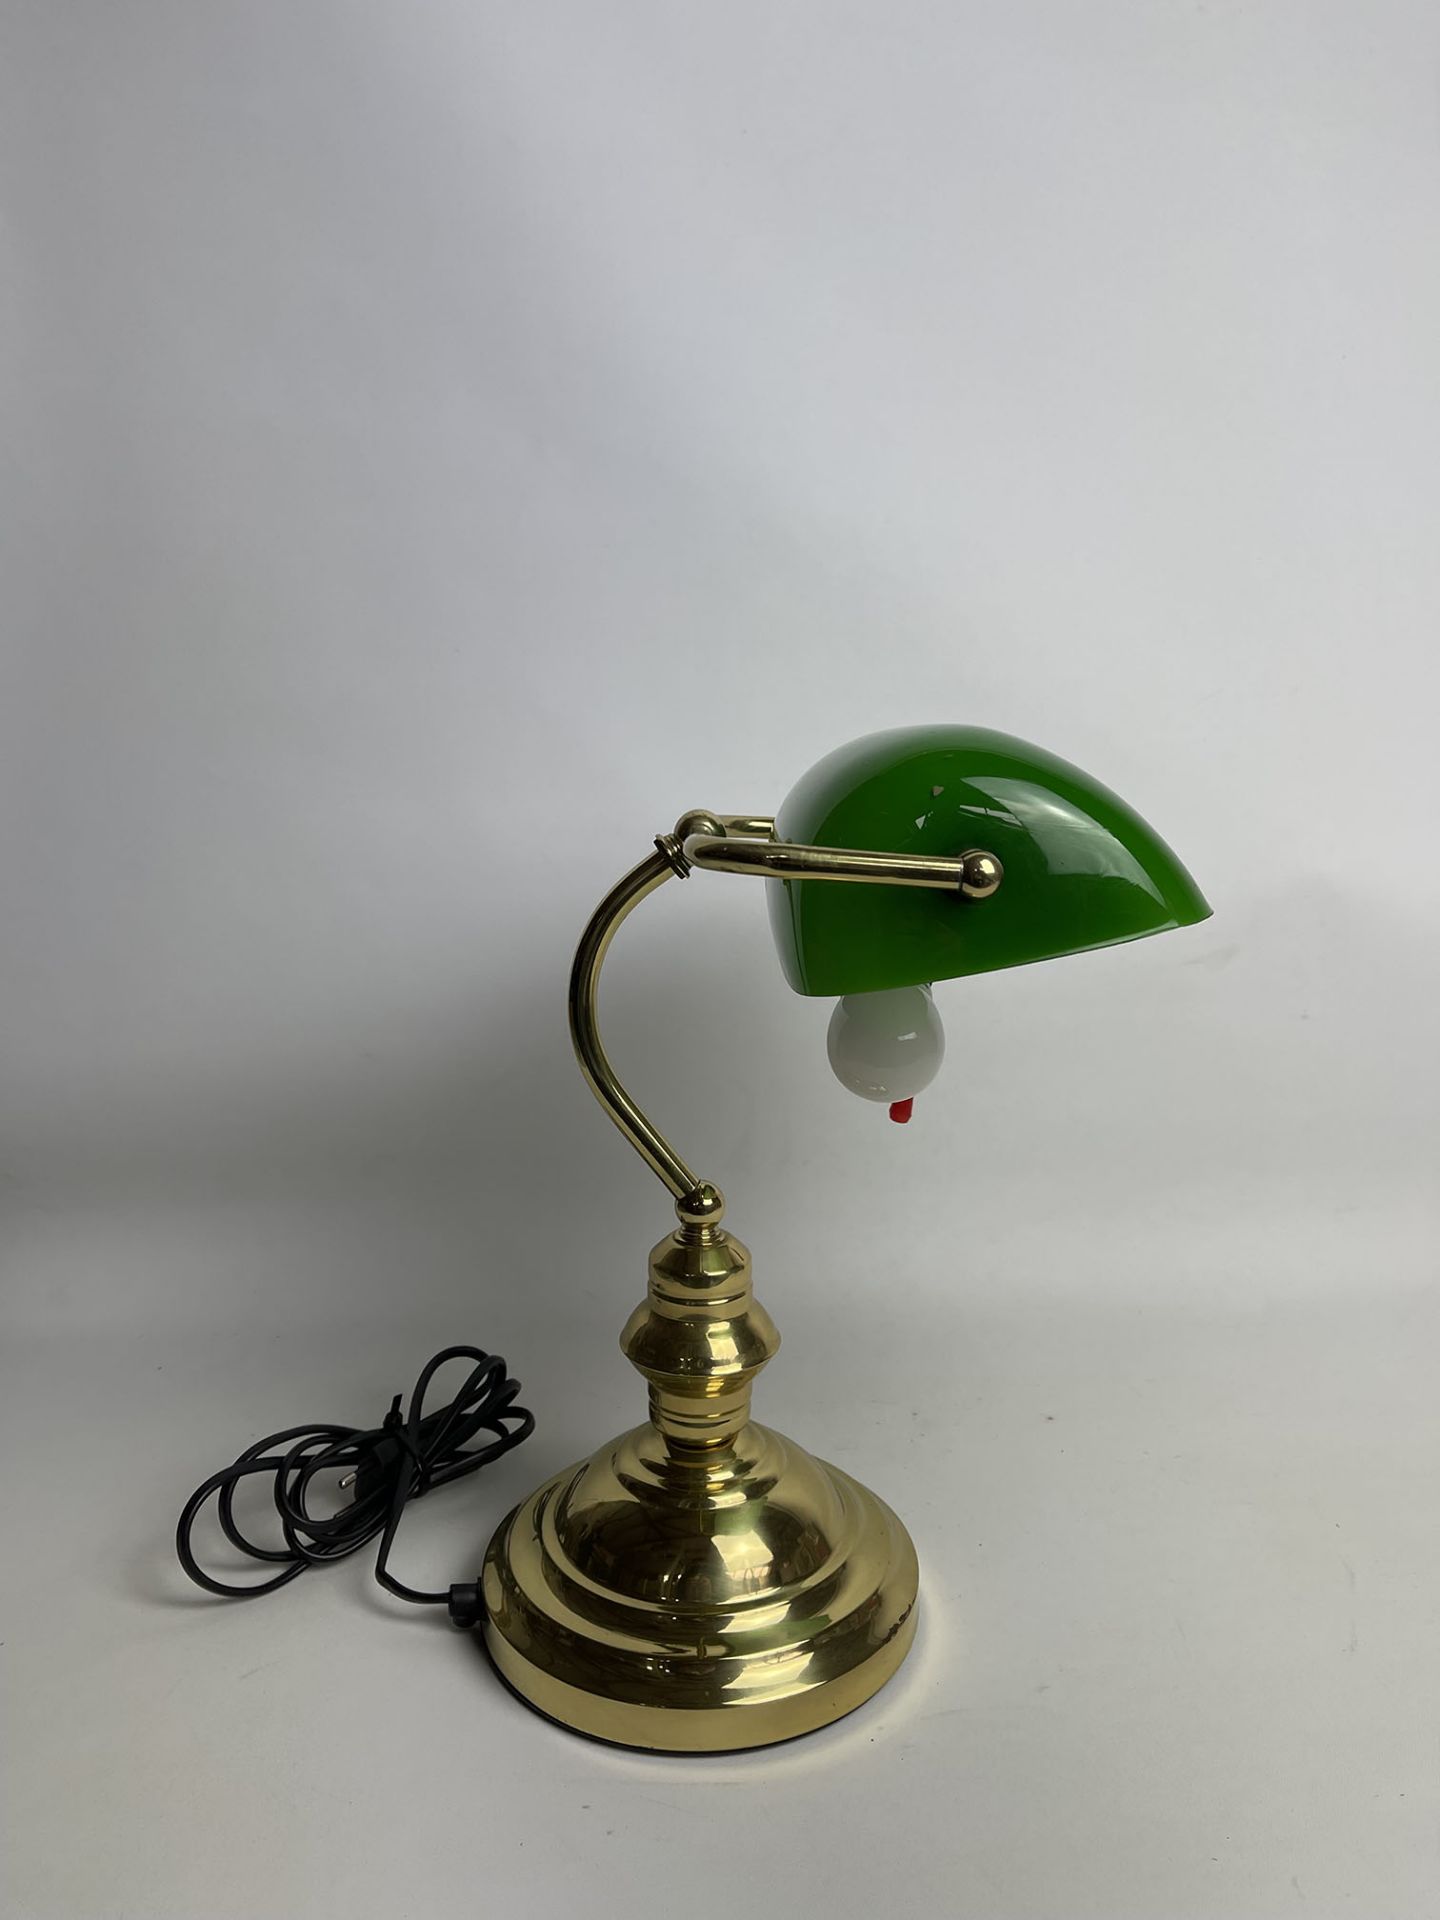 Vintage American Desk Lamp with Green Lamp Shade - Image 3 of 9